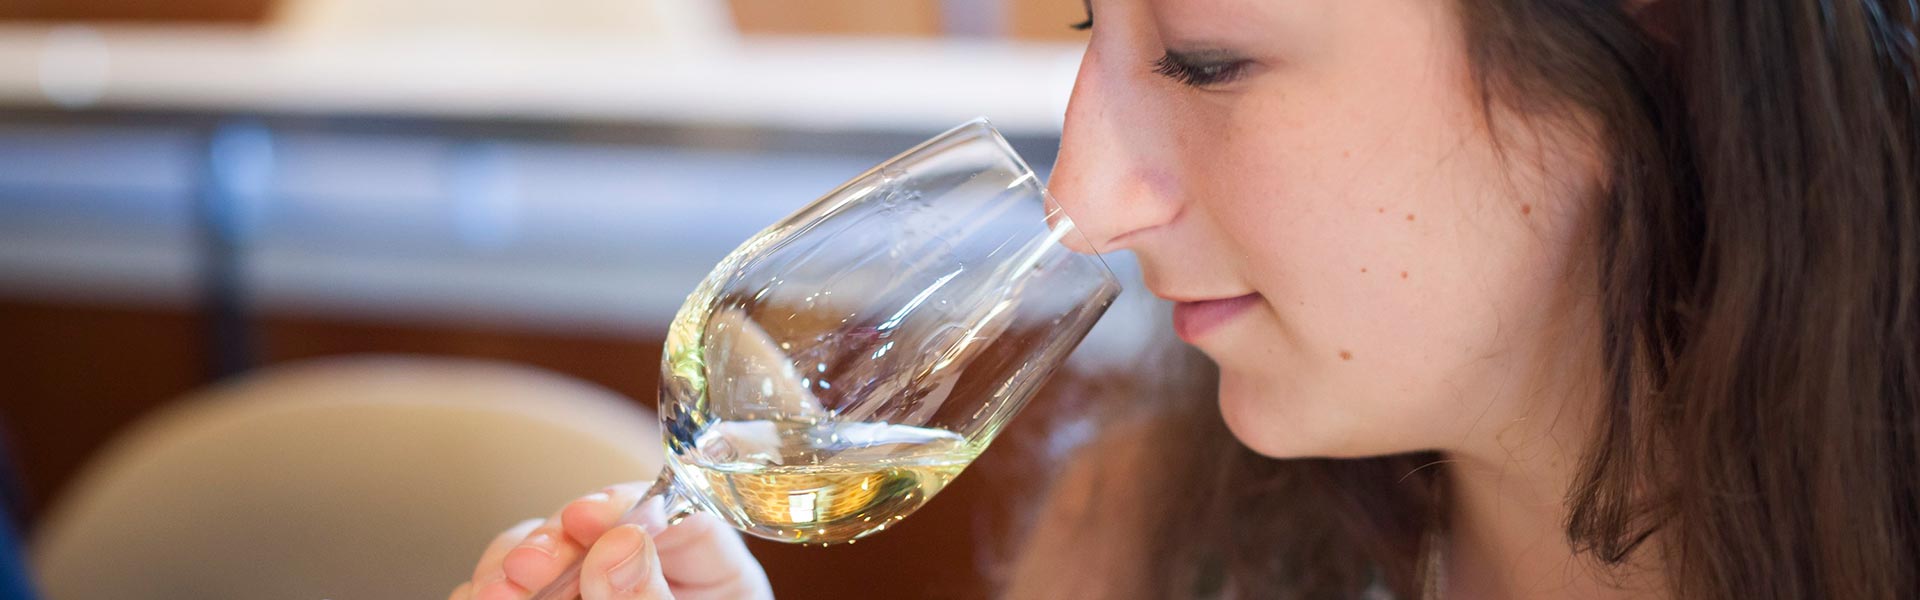 CIA Master's Degree in Wine Management student tasting wine.